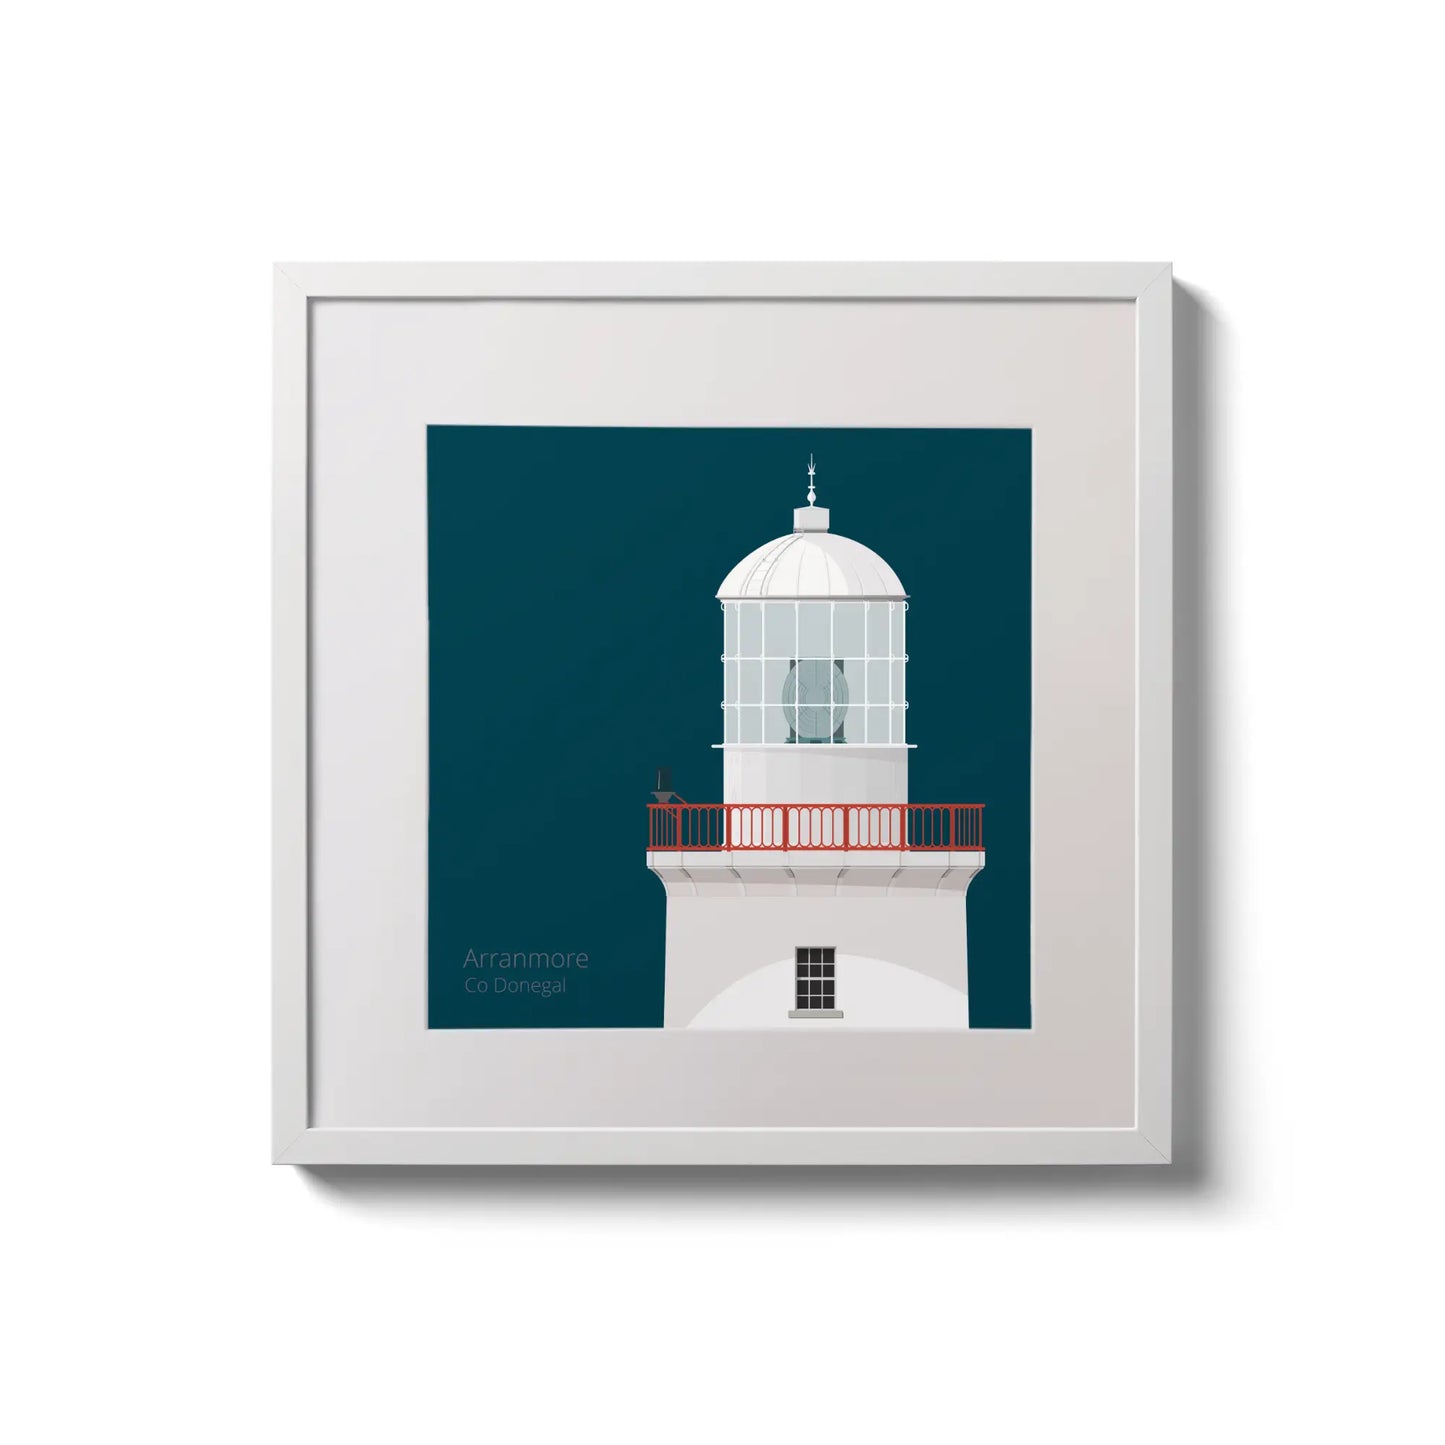 Illustration of Arranmore lighthouse on a midnight blue background,  in a white square frame measuring 20x20cm.